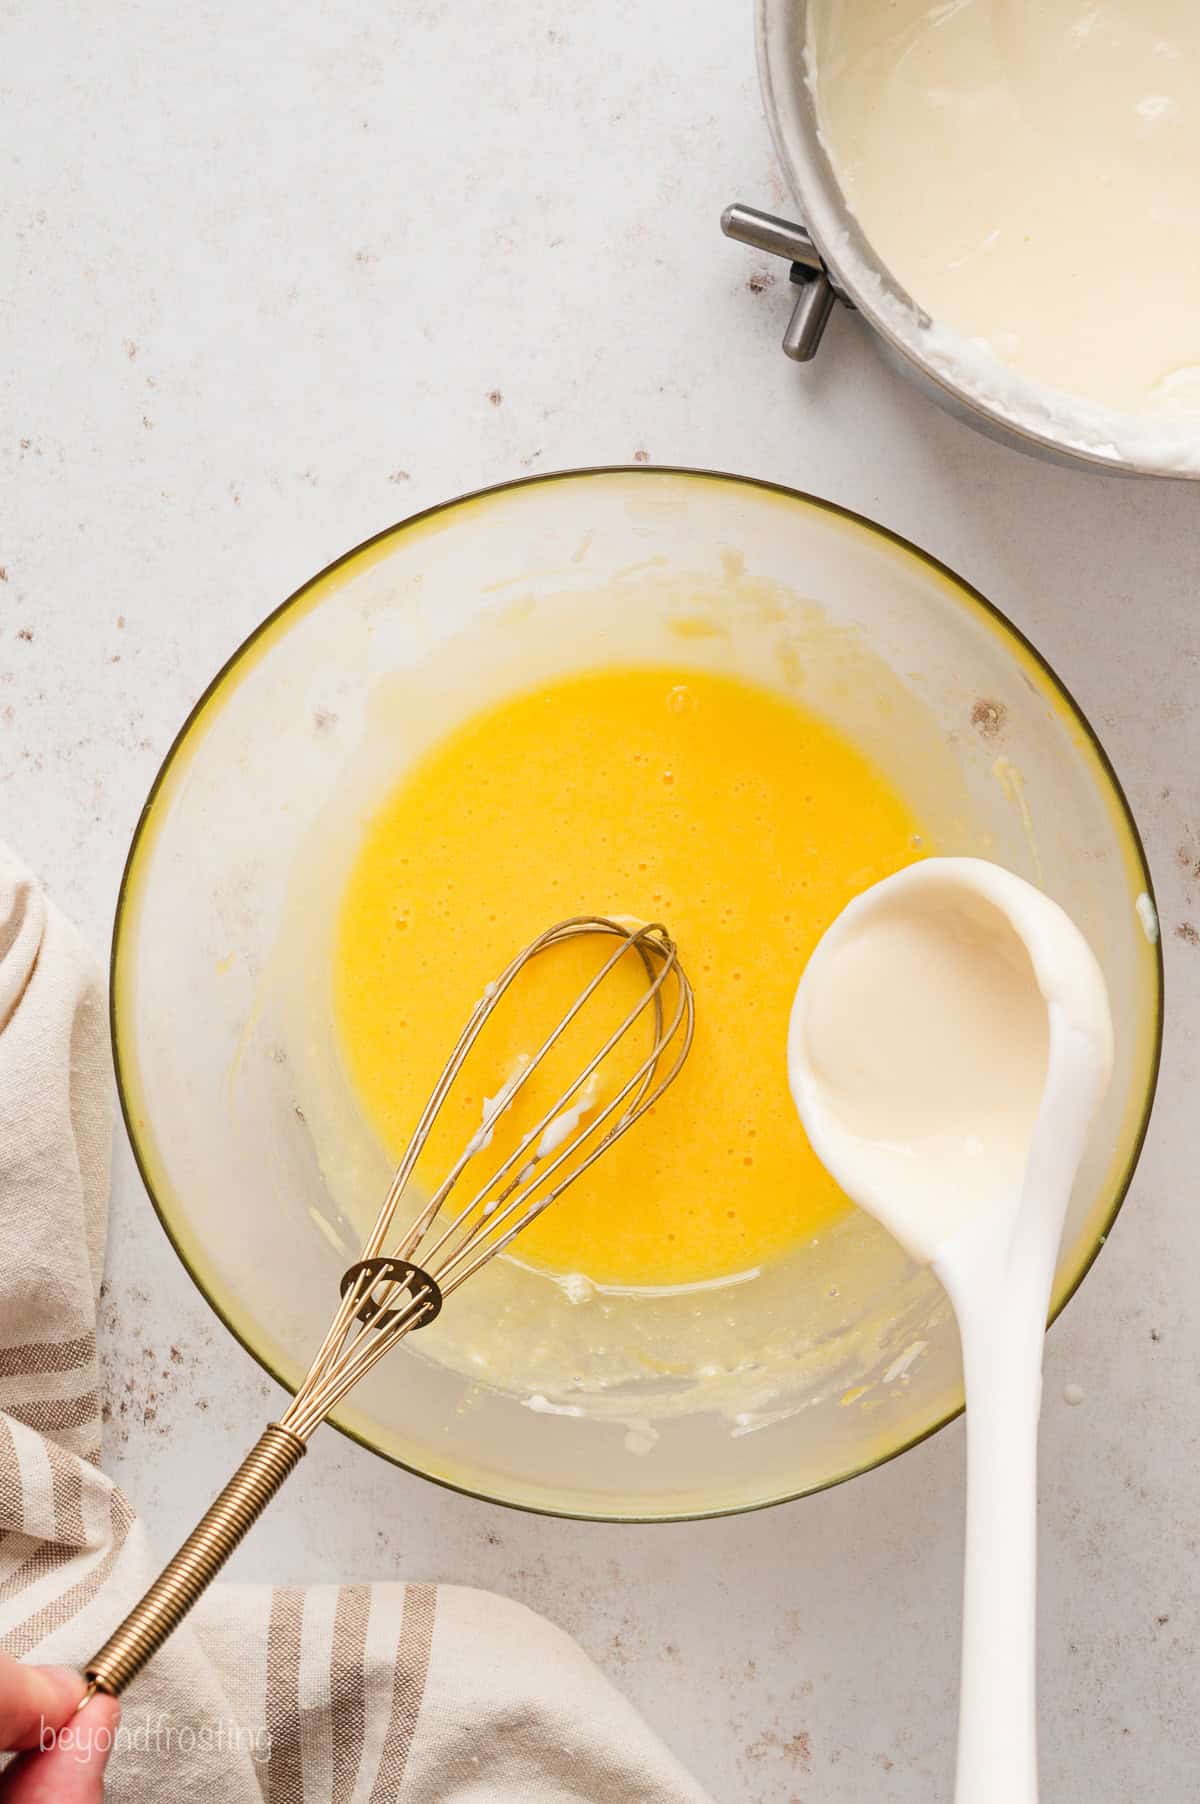 Warm pudding mixture added to a bowl of whisked egg yolks to temper them.